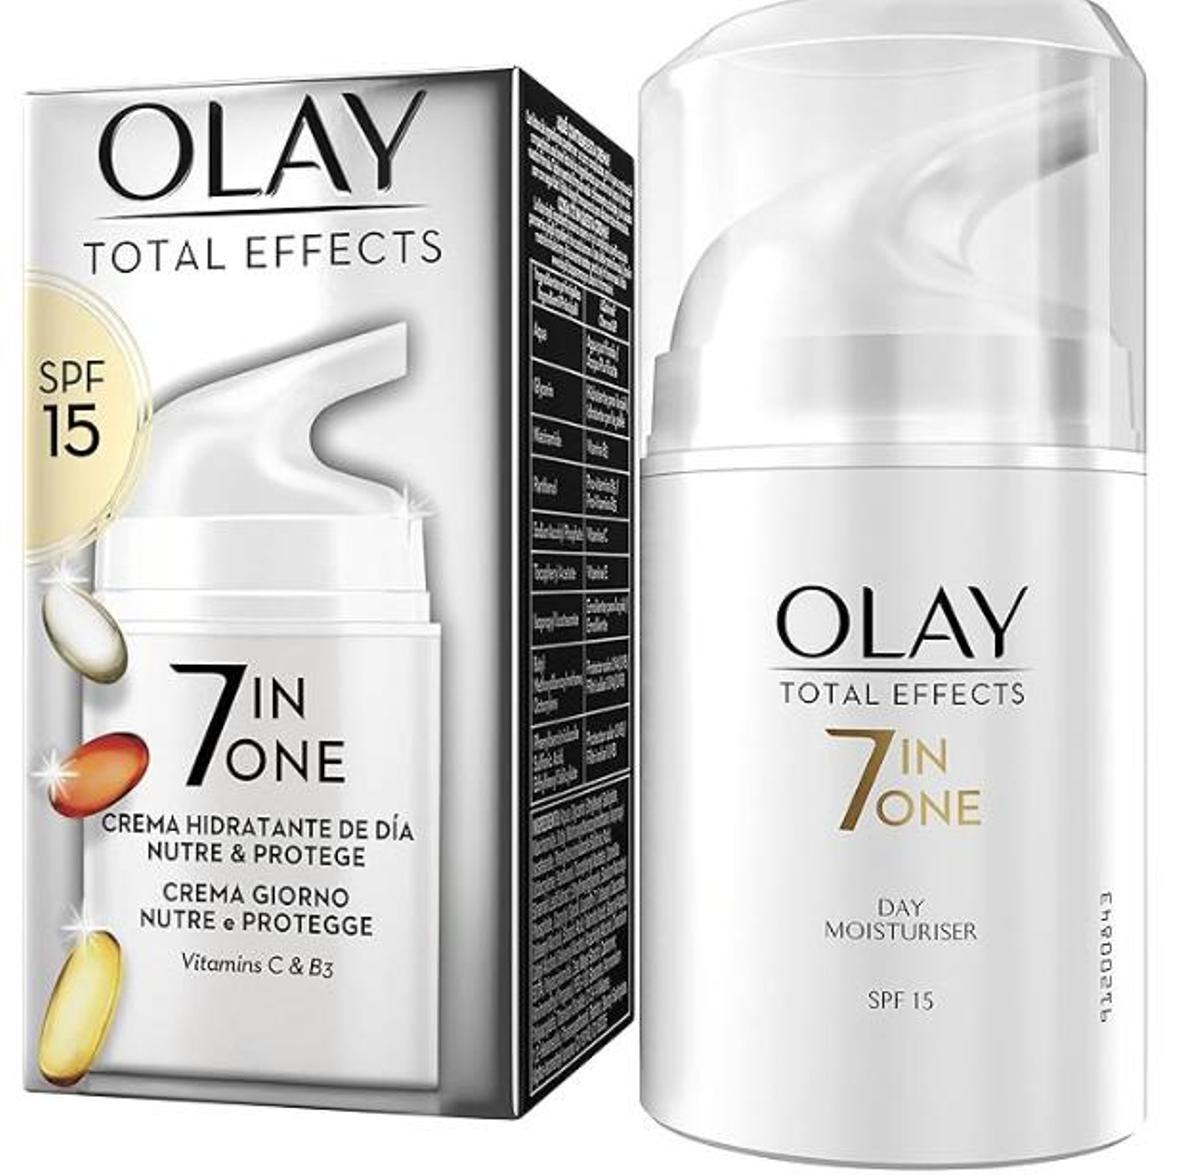 Olay Total Effects 7